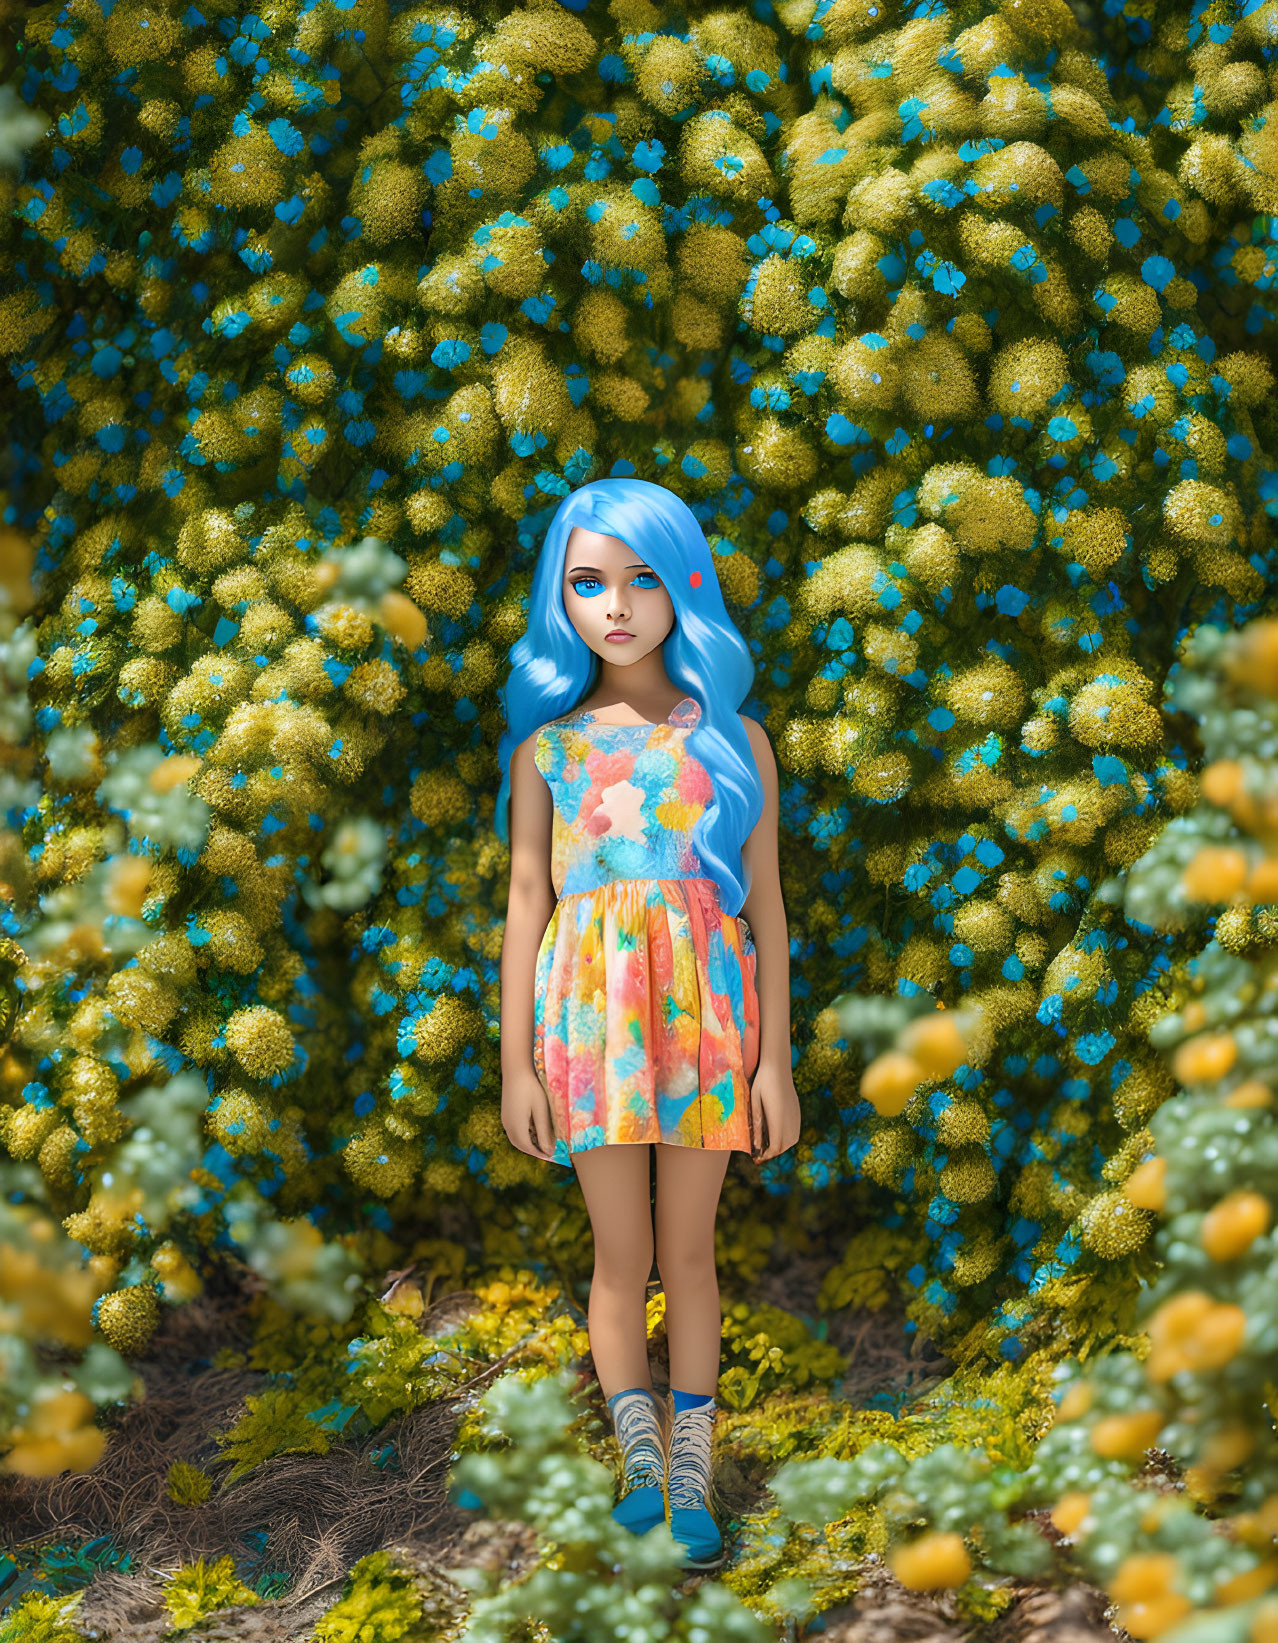 Colorful digital artwork: girl with blue hair in vibrant dress by yellow flowering bushes